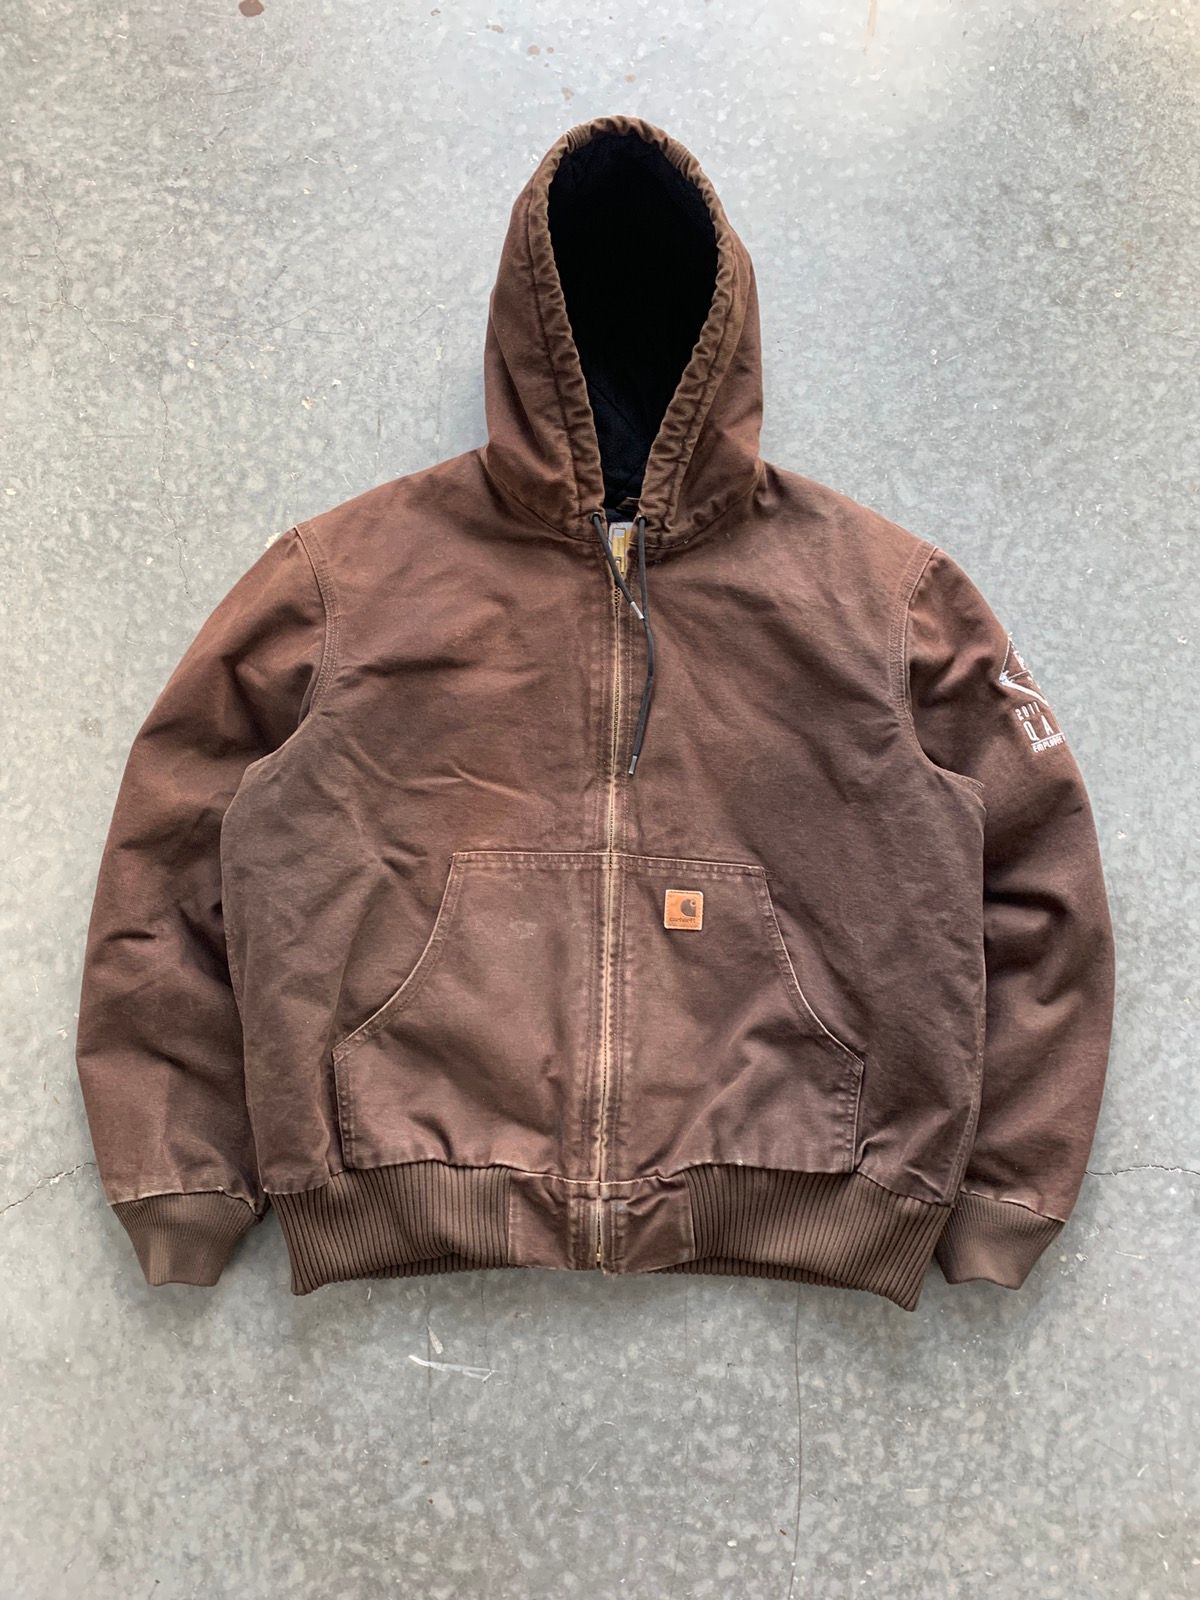 Pre-owned Carhartt X Vintage Crazy Vintage Y2k Carhartt Hooded Jacket Faded Brown Boxy